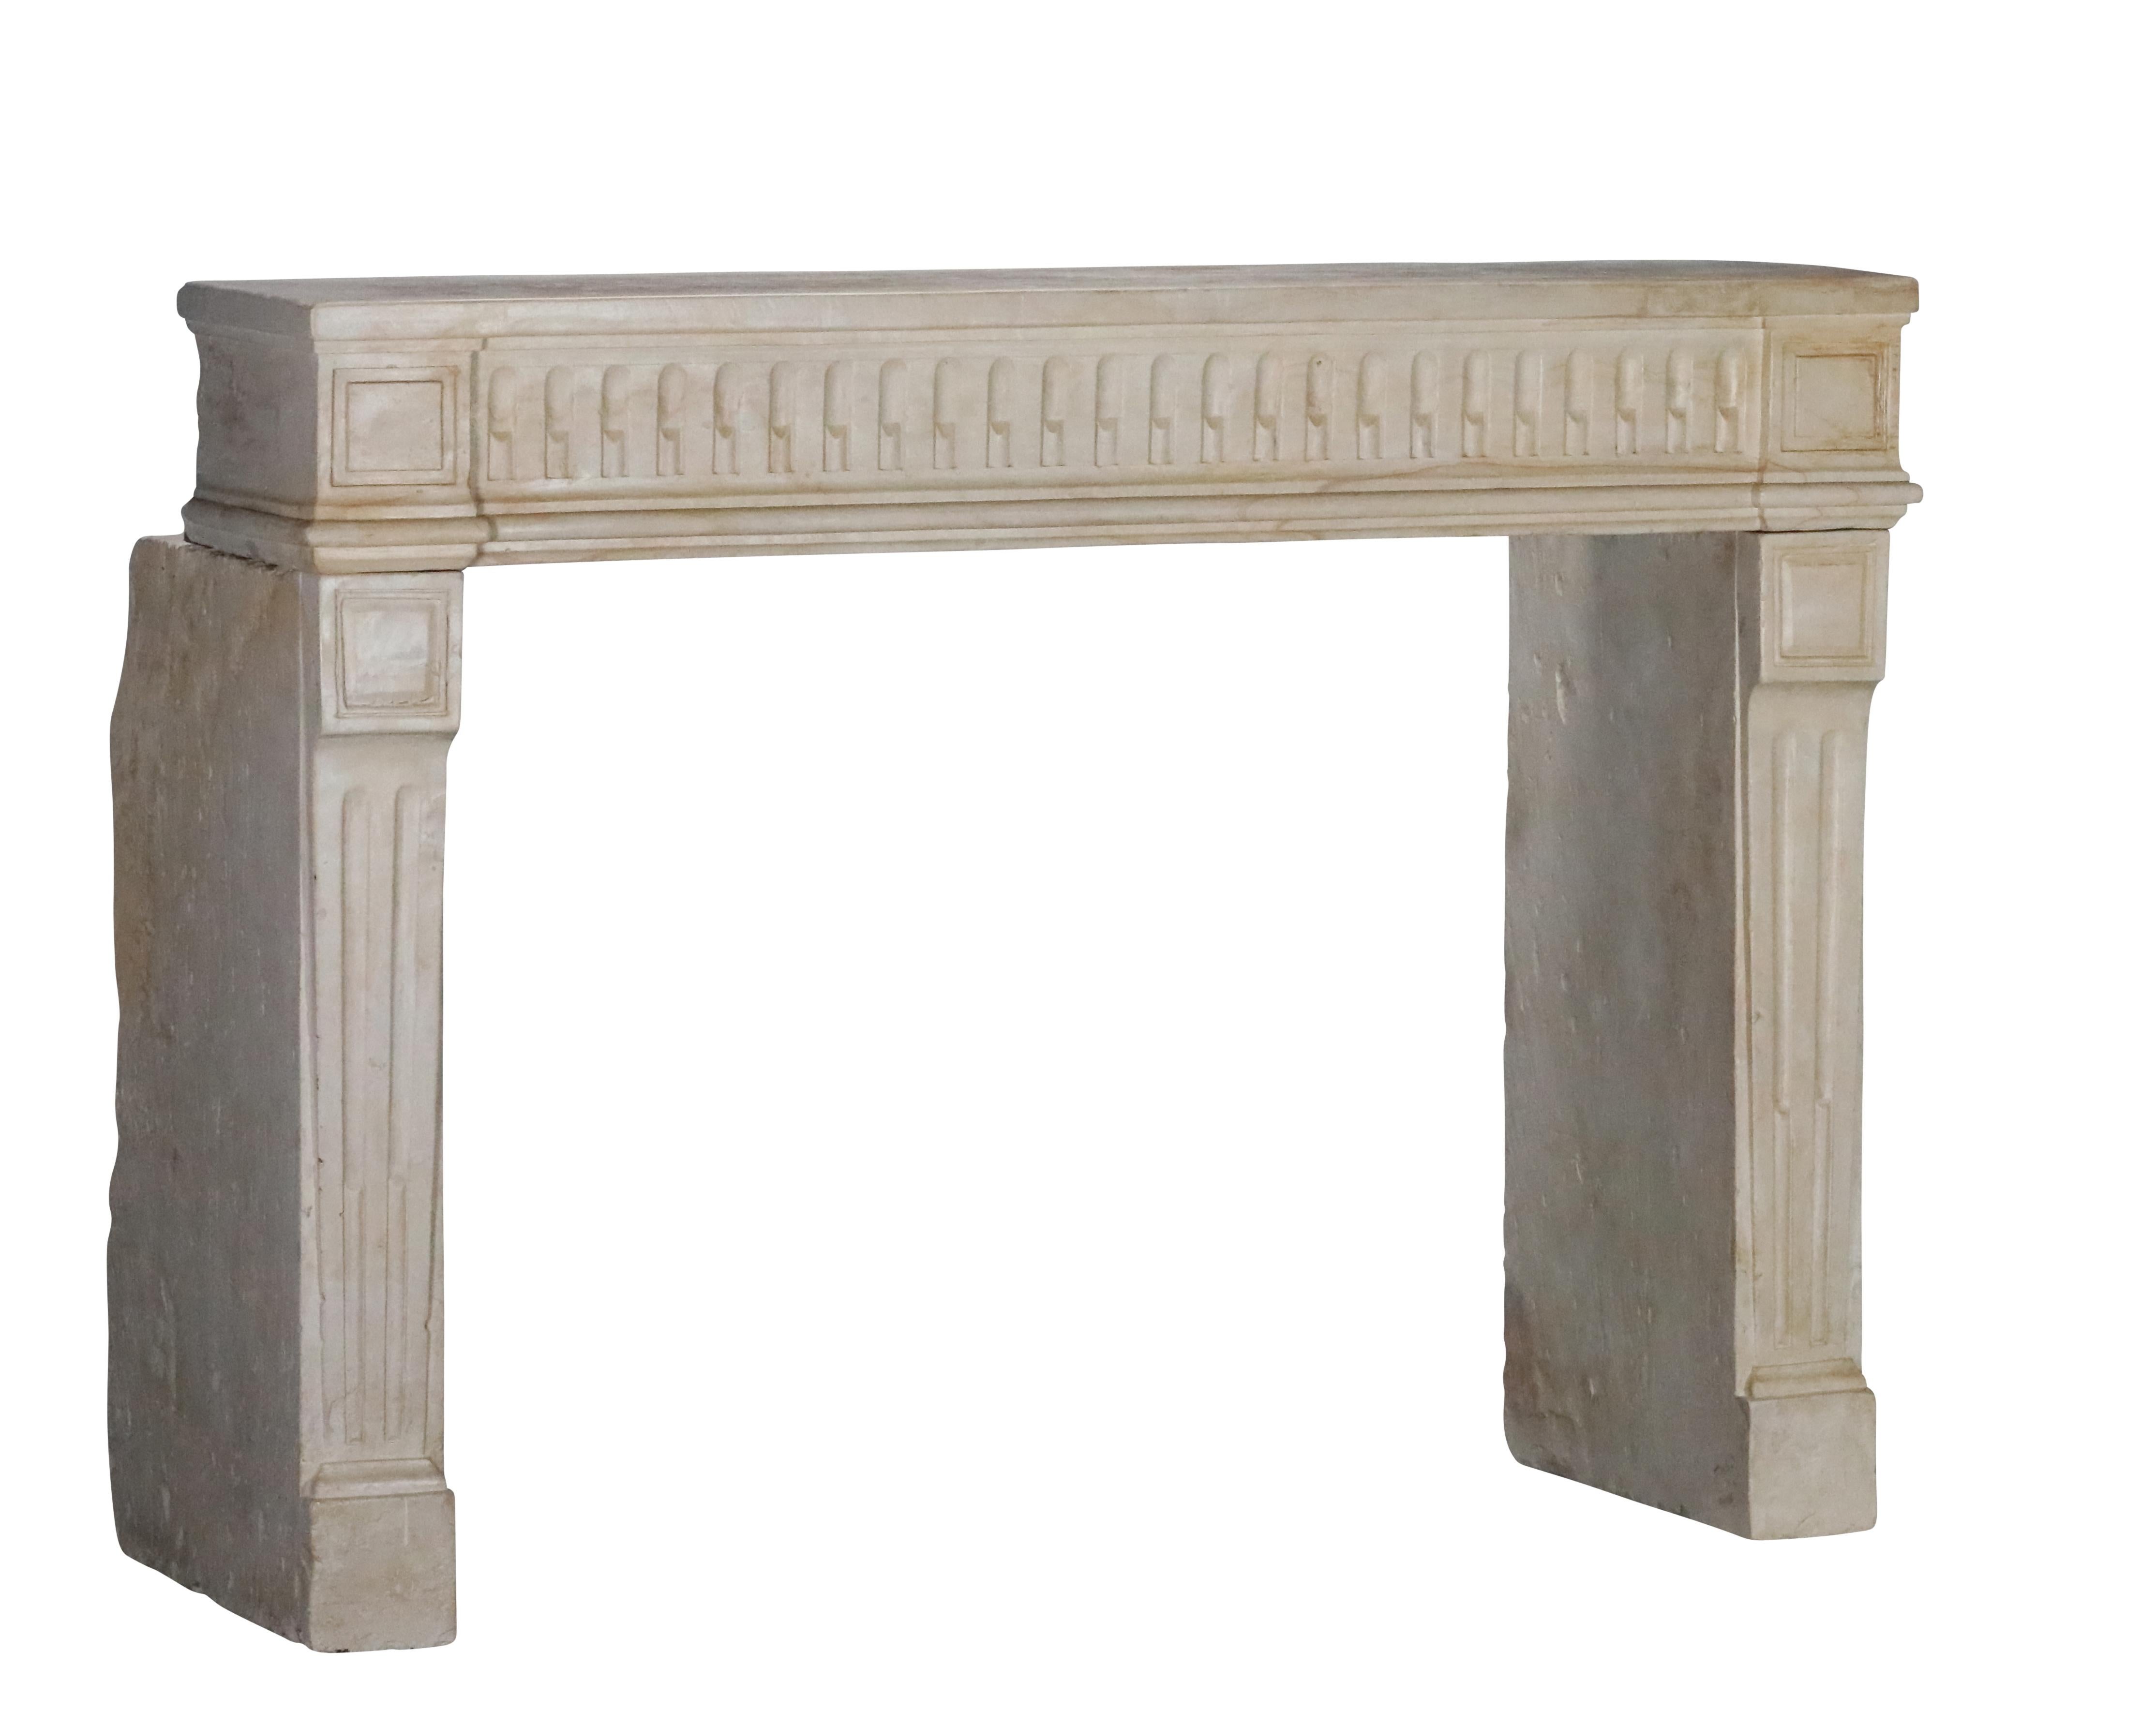 French Classy Chic 18th Century Limestone Fireplace For Exclusive Interior Project For Sale